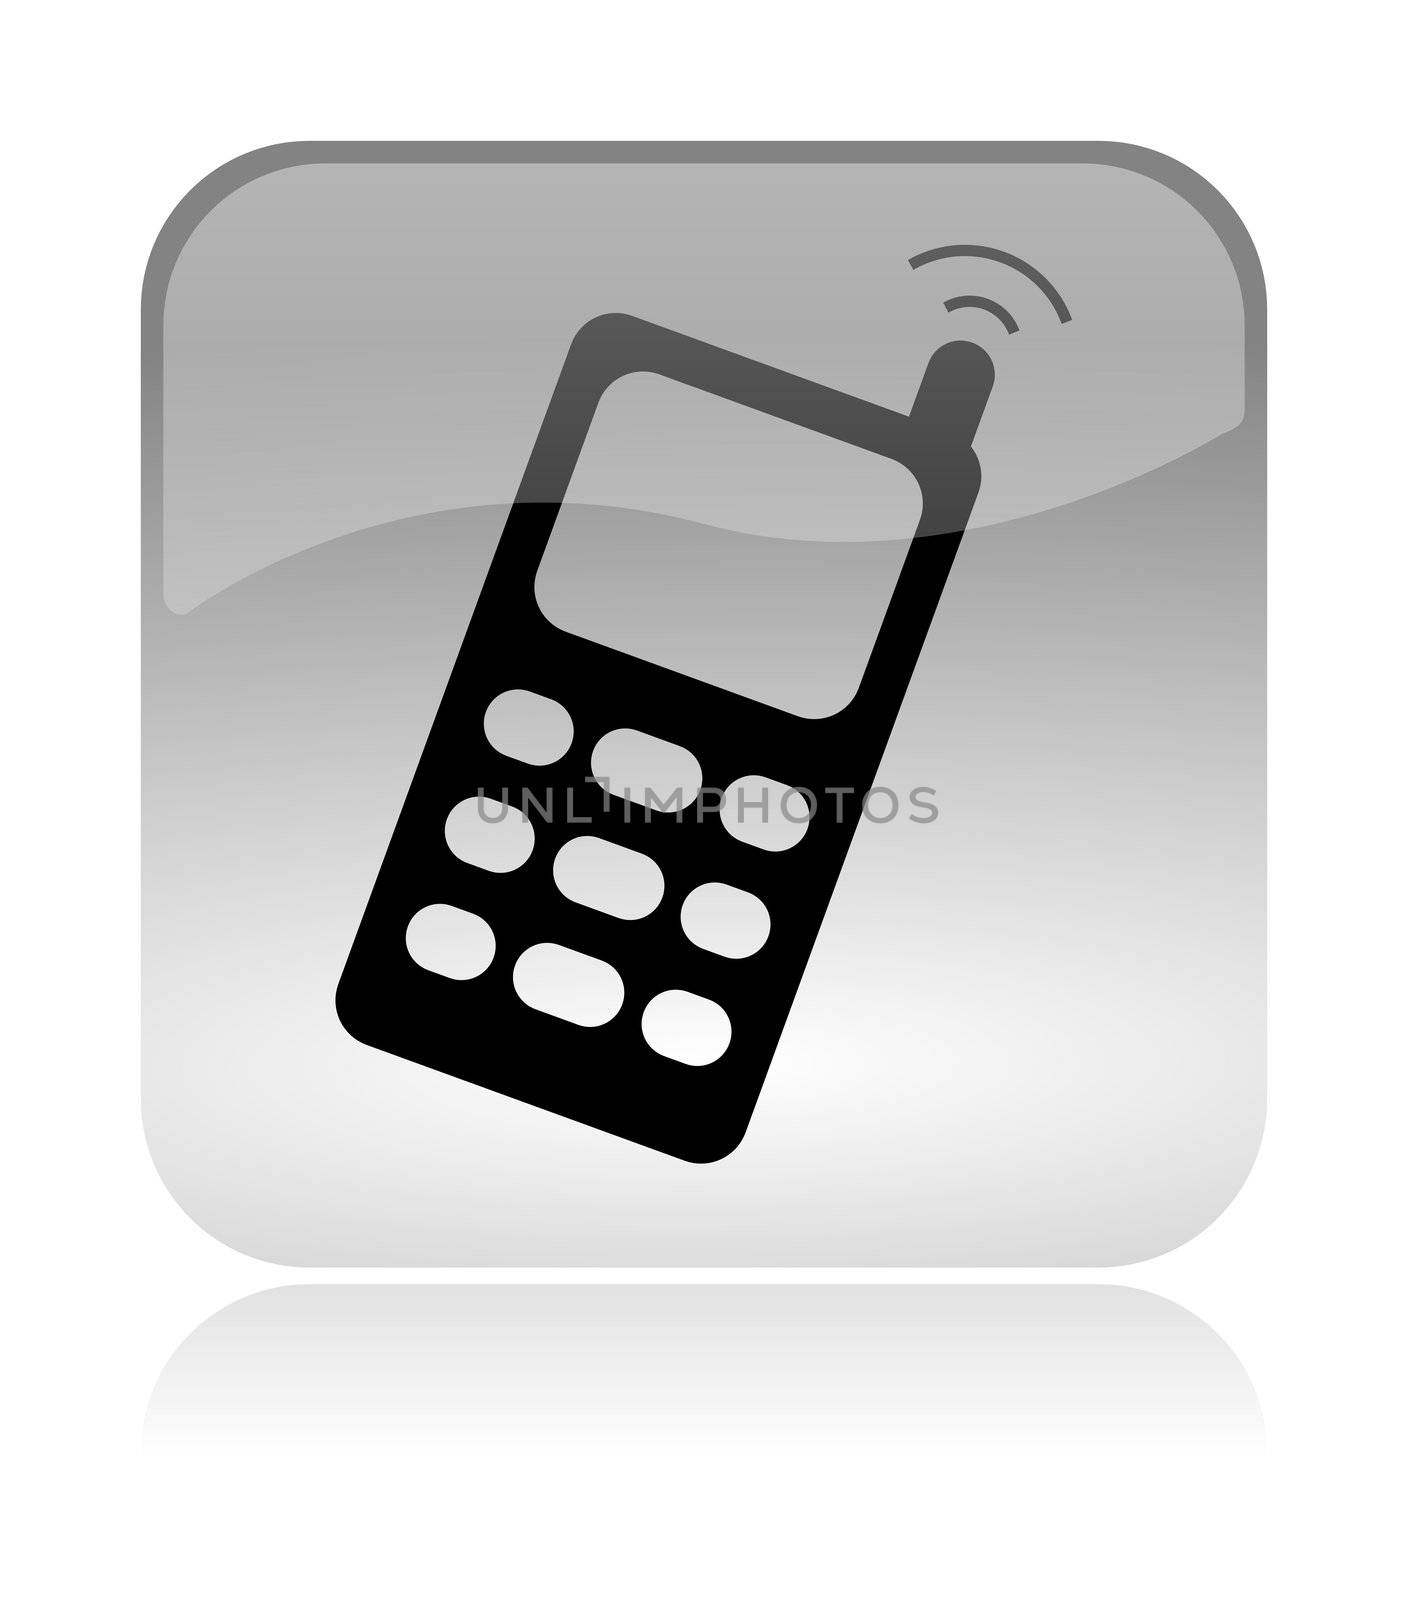 cellular mobile phone white, transparent and glossy web interface icon with reflection